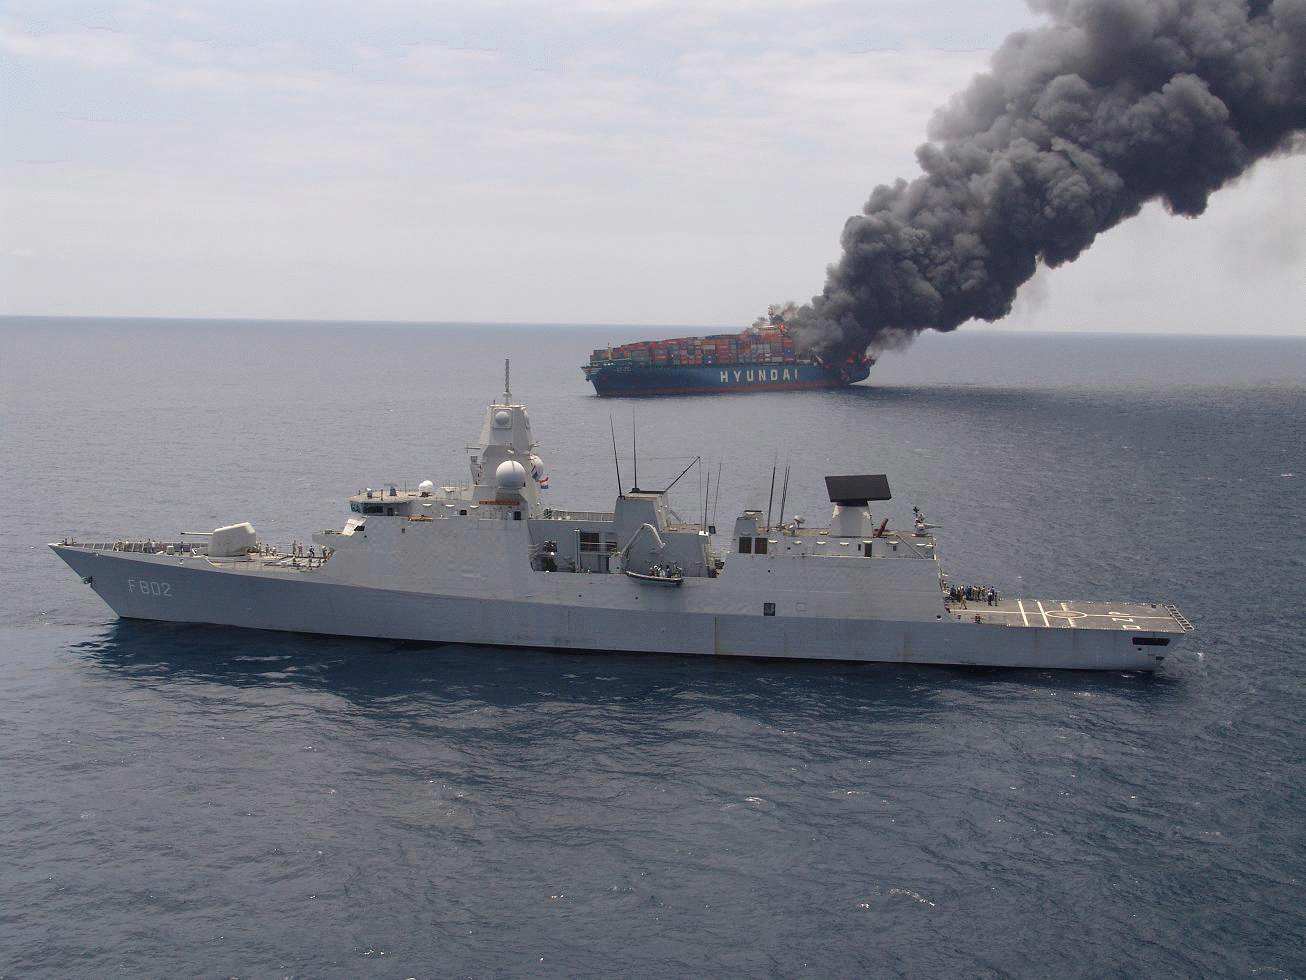 Navy Ship and Hyundai Fortune on Fire